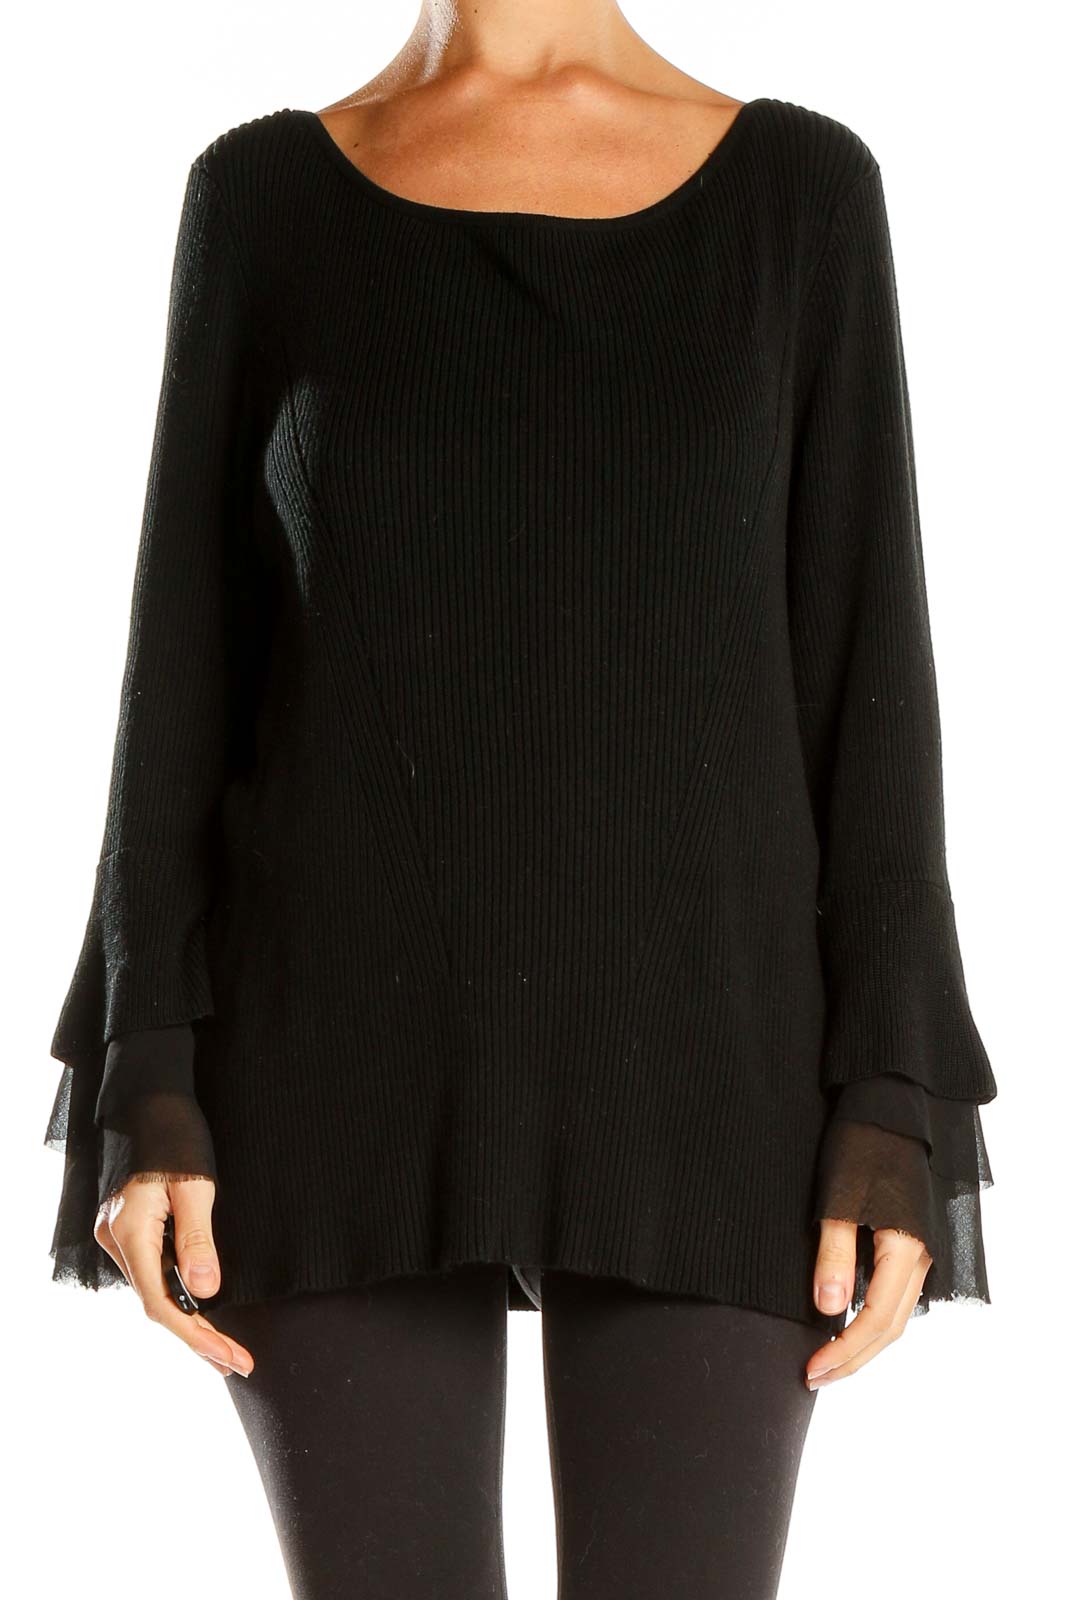 Black Ribbed Knit All Day Wear Top Front